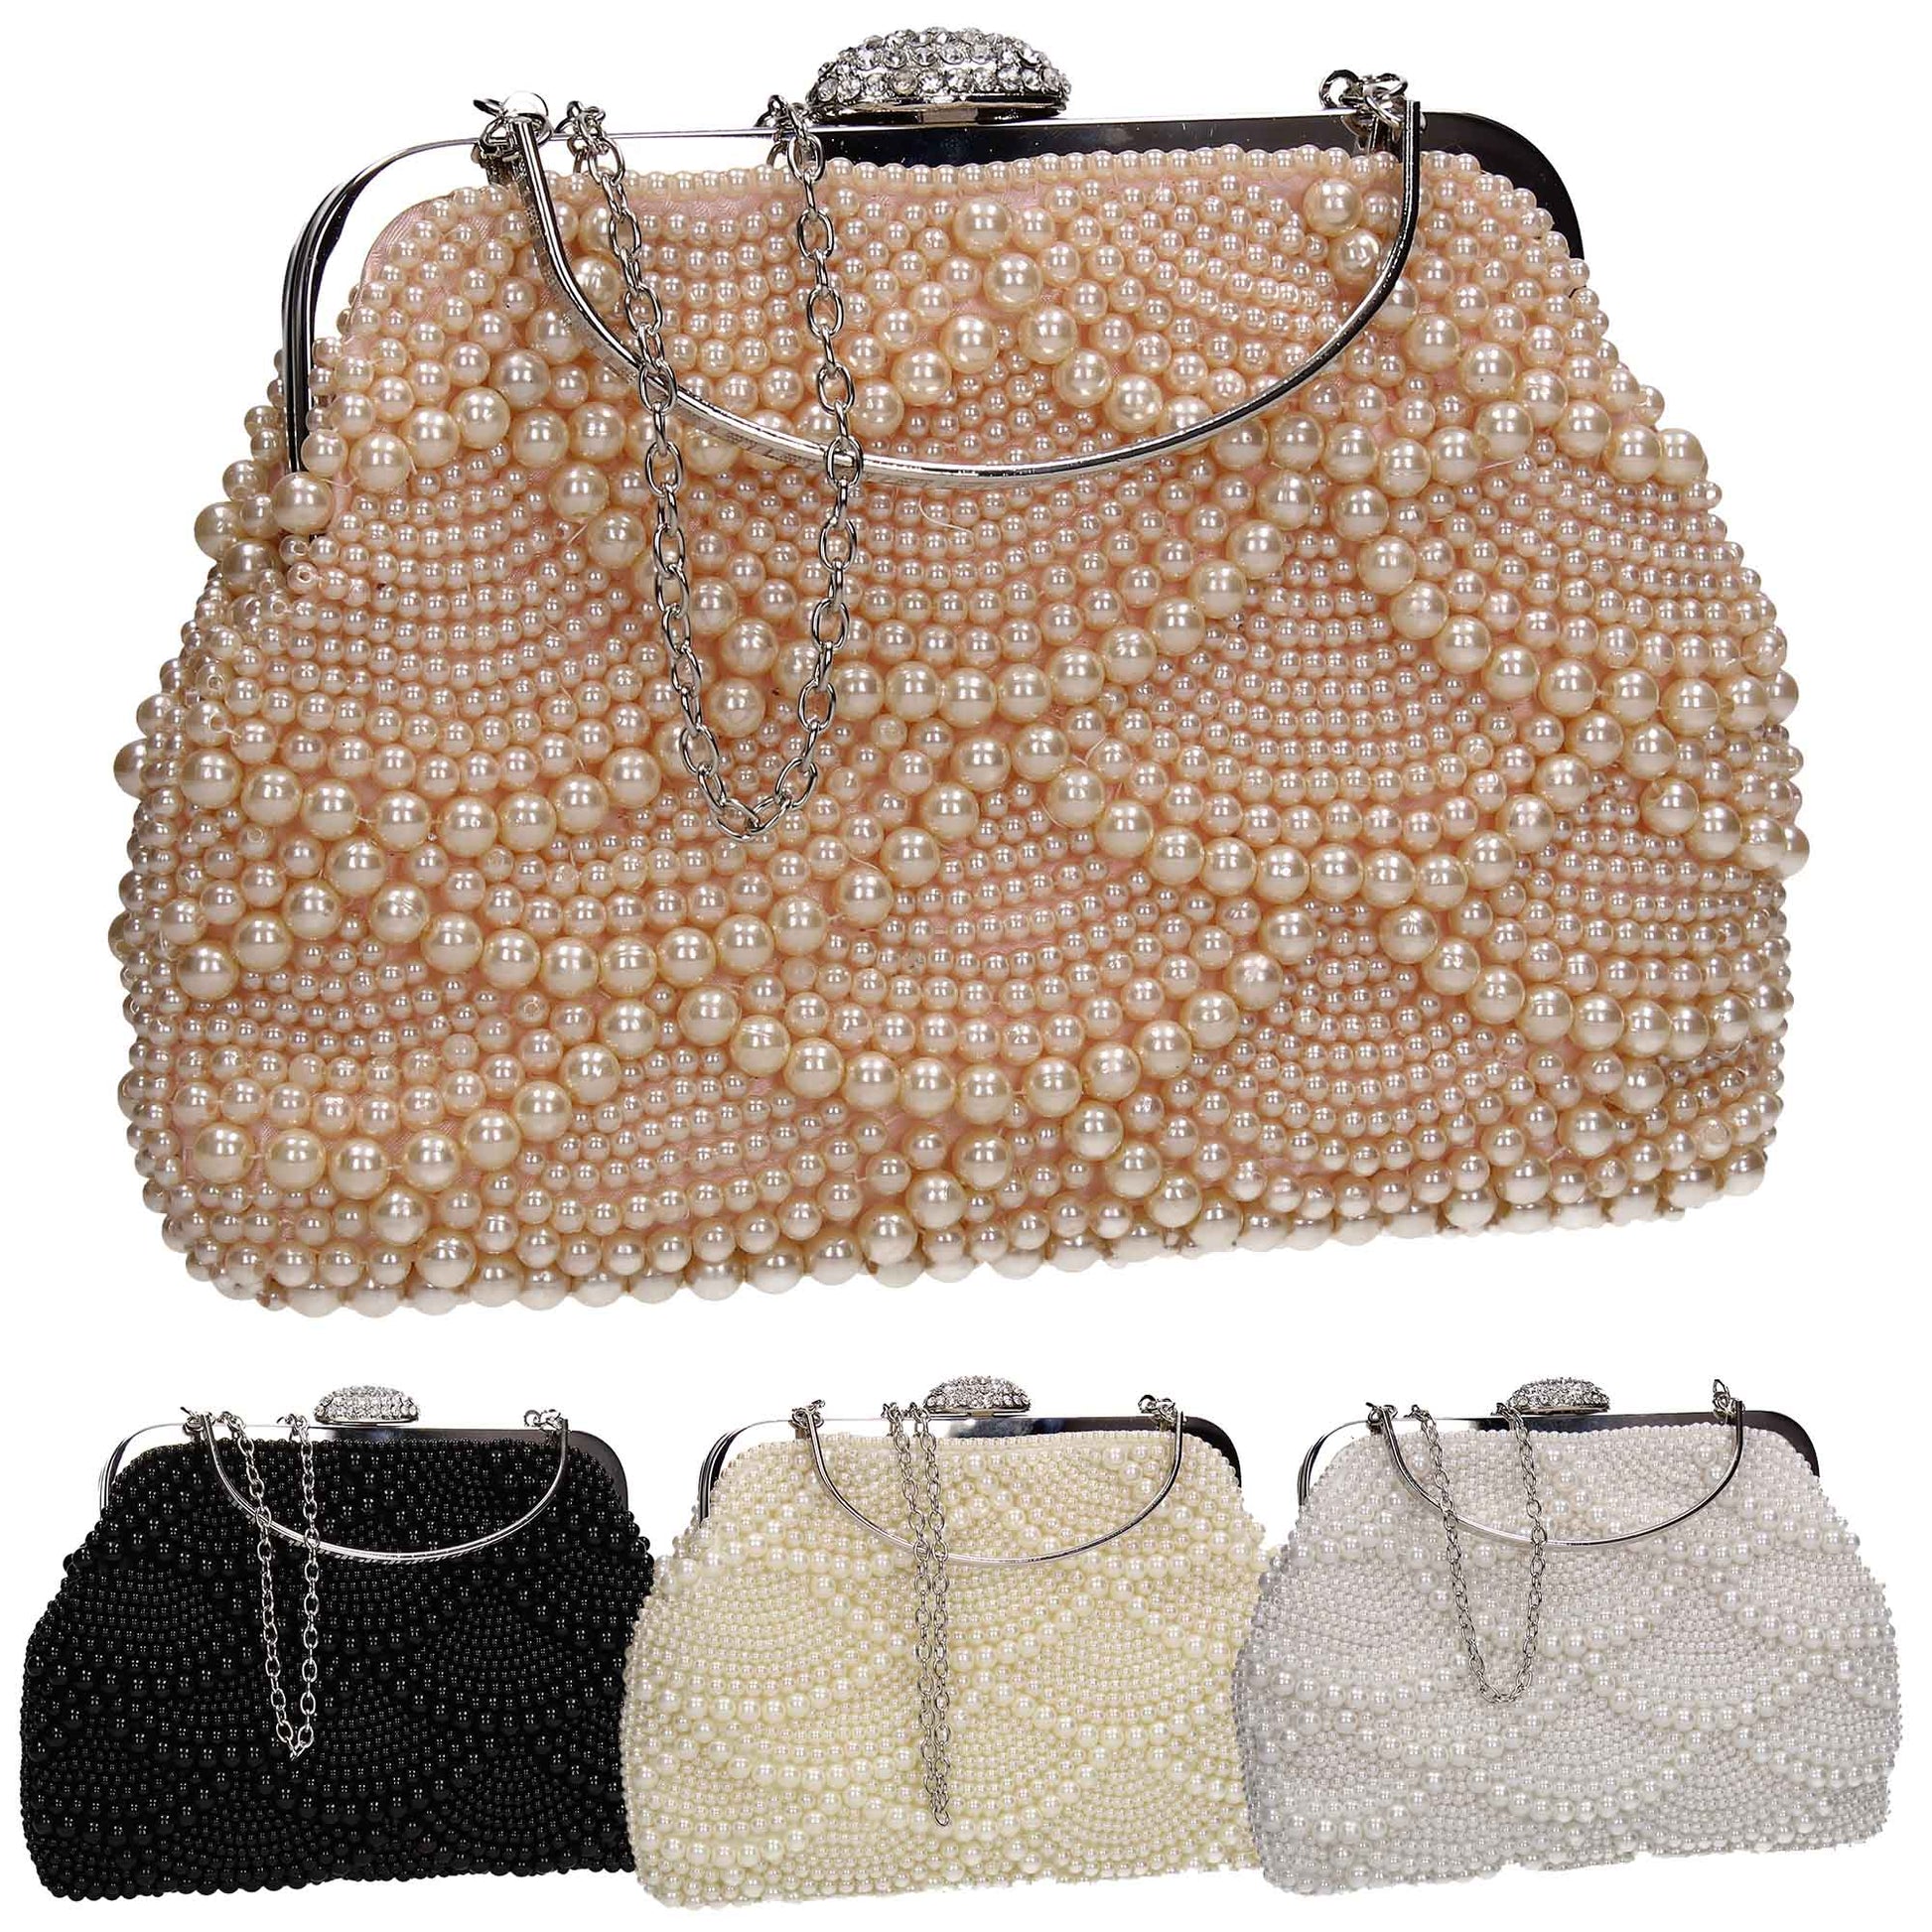 SWANKYSWANS Hailee Faux Pearl Detail Clutch Bag Champagne Cute Cheap Clutch Bag For Weddings School and Work